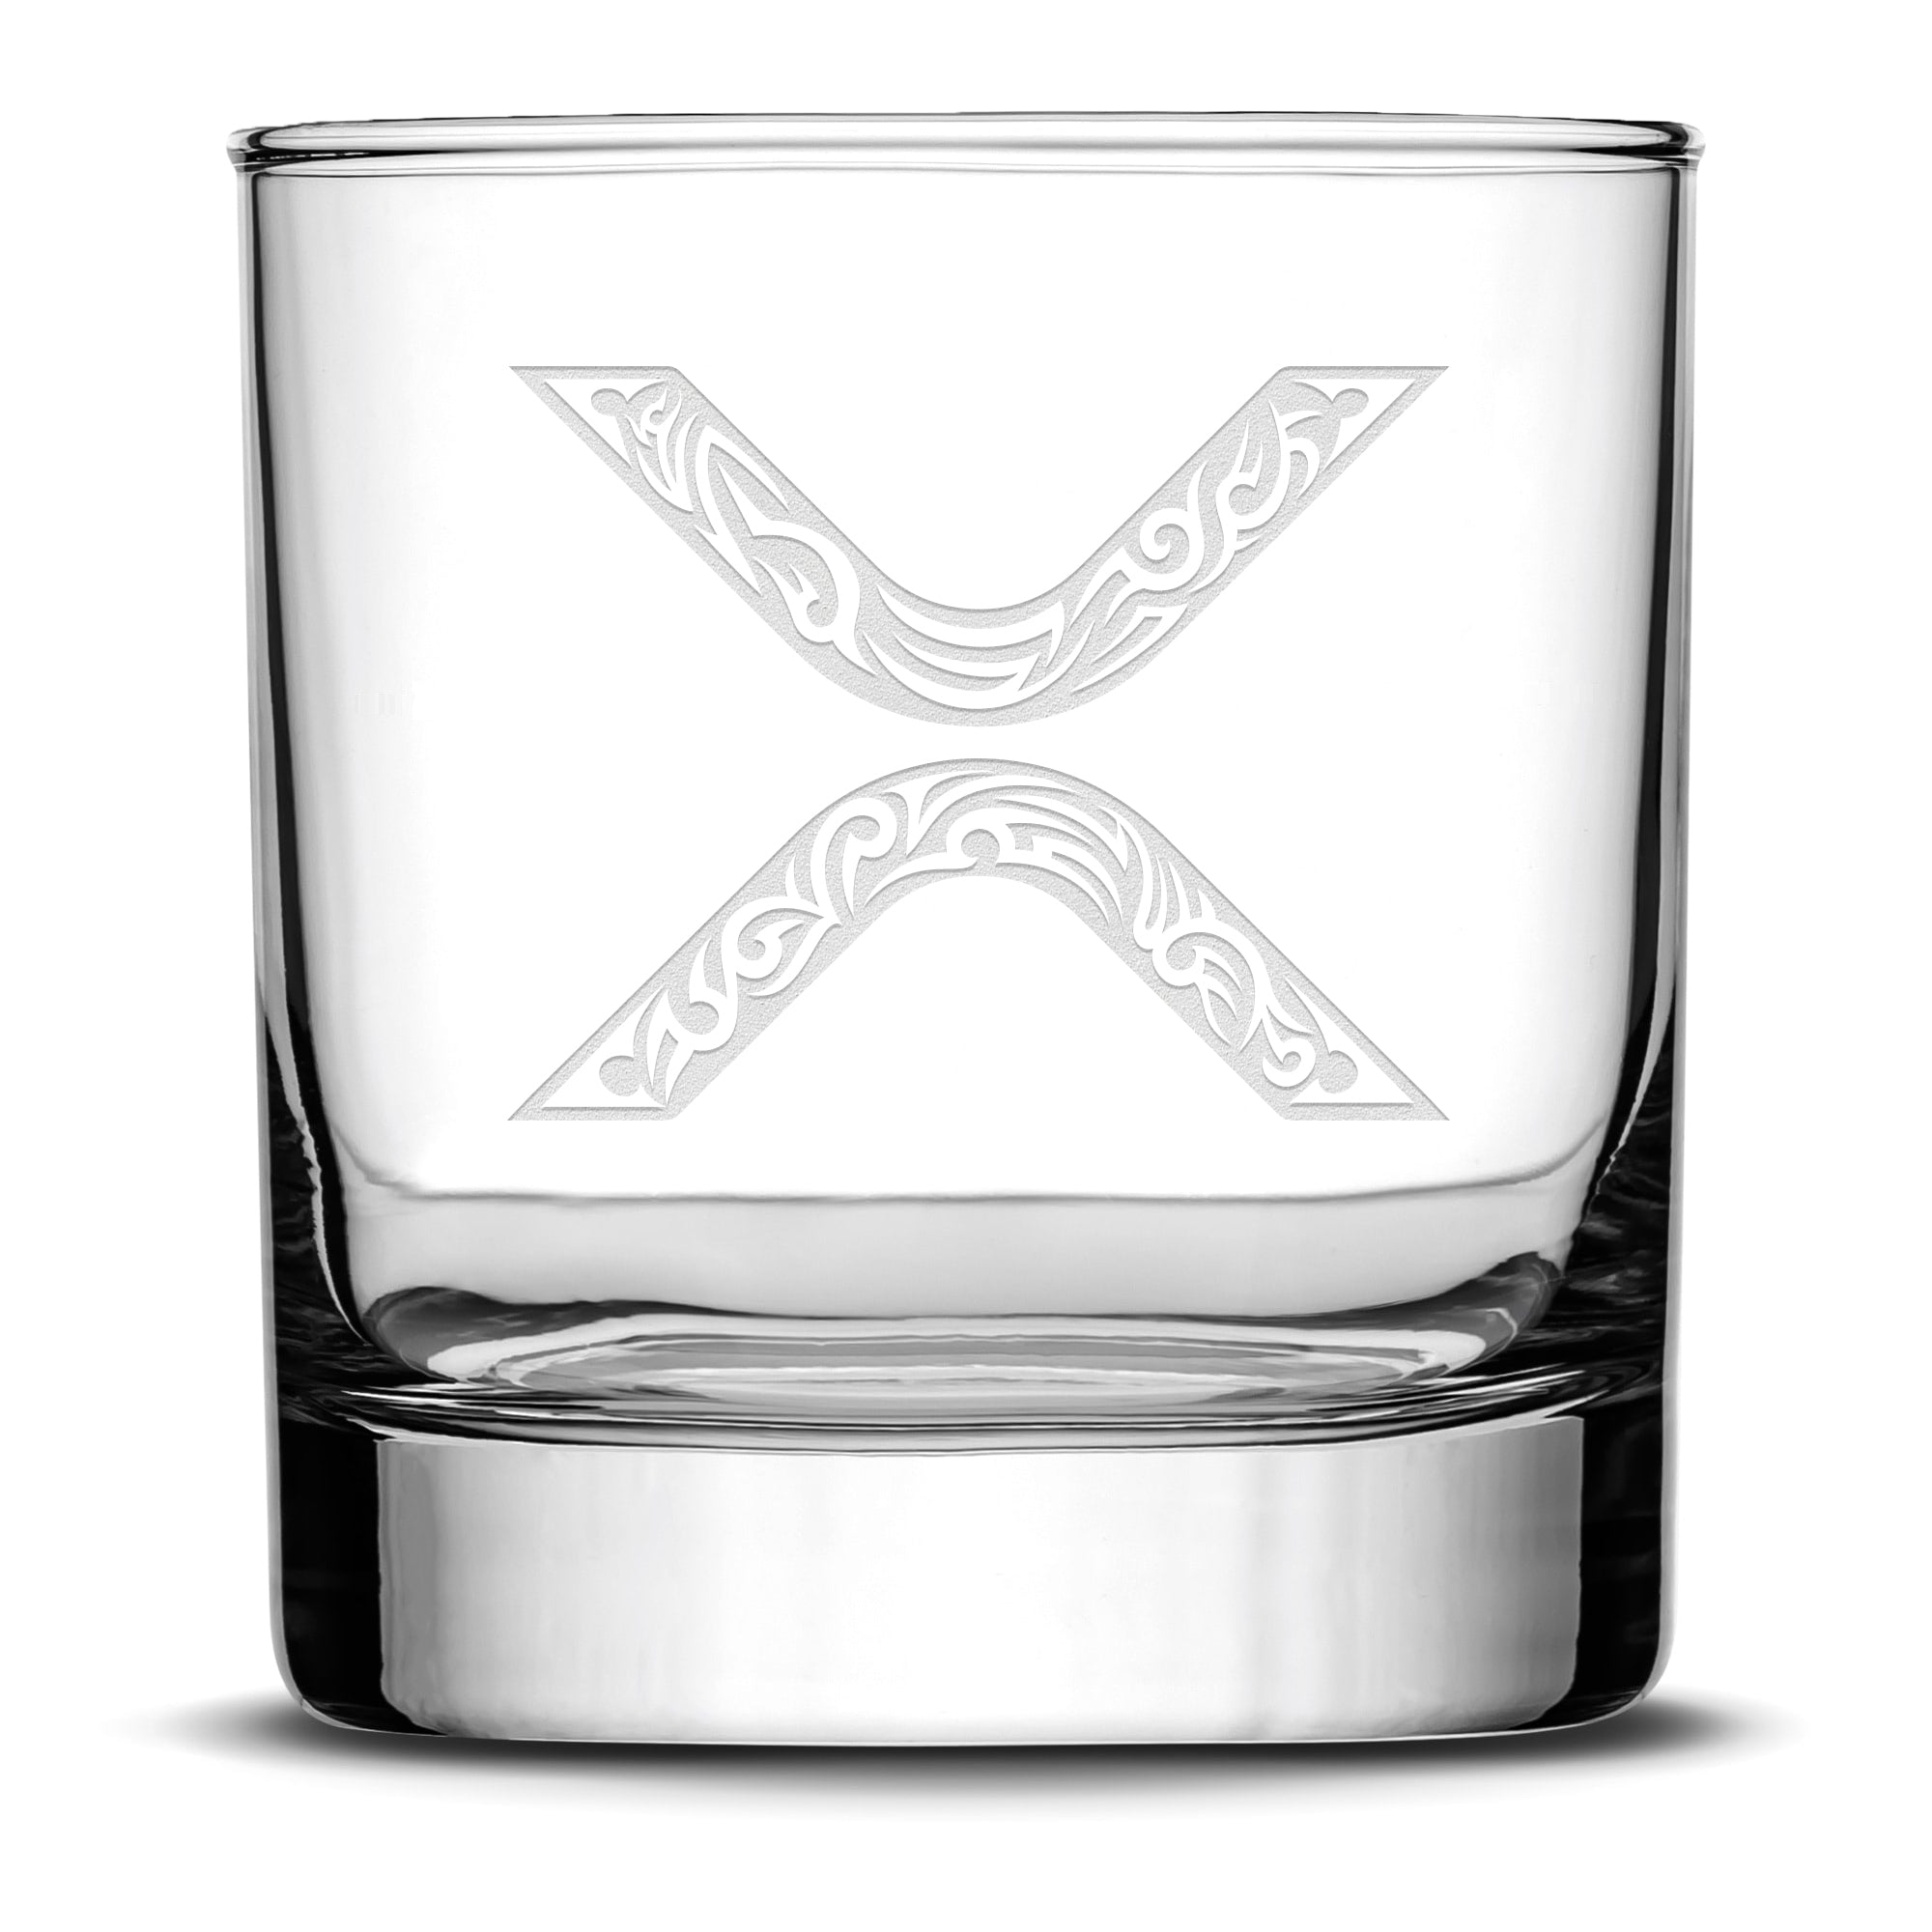 Integrity Bottles Premium, Tribal XRP Crypto Coin Whiskey Glass, Laser Etched or Hand Etched, Rocks Glass, Made in USA, 11oz